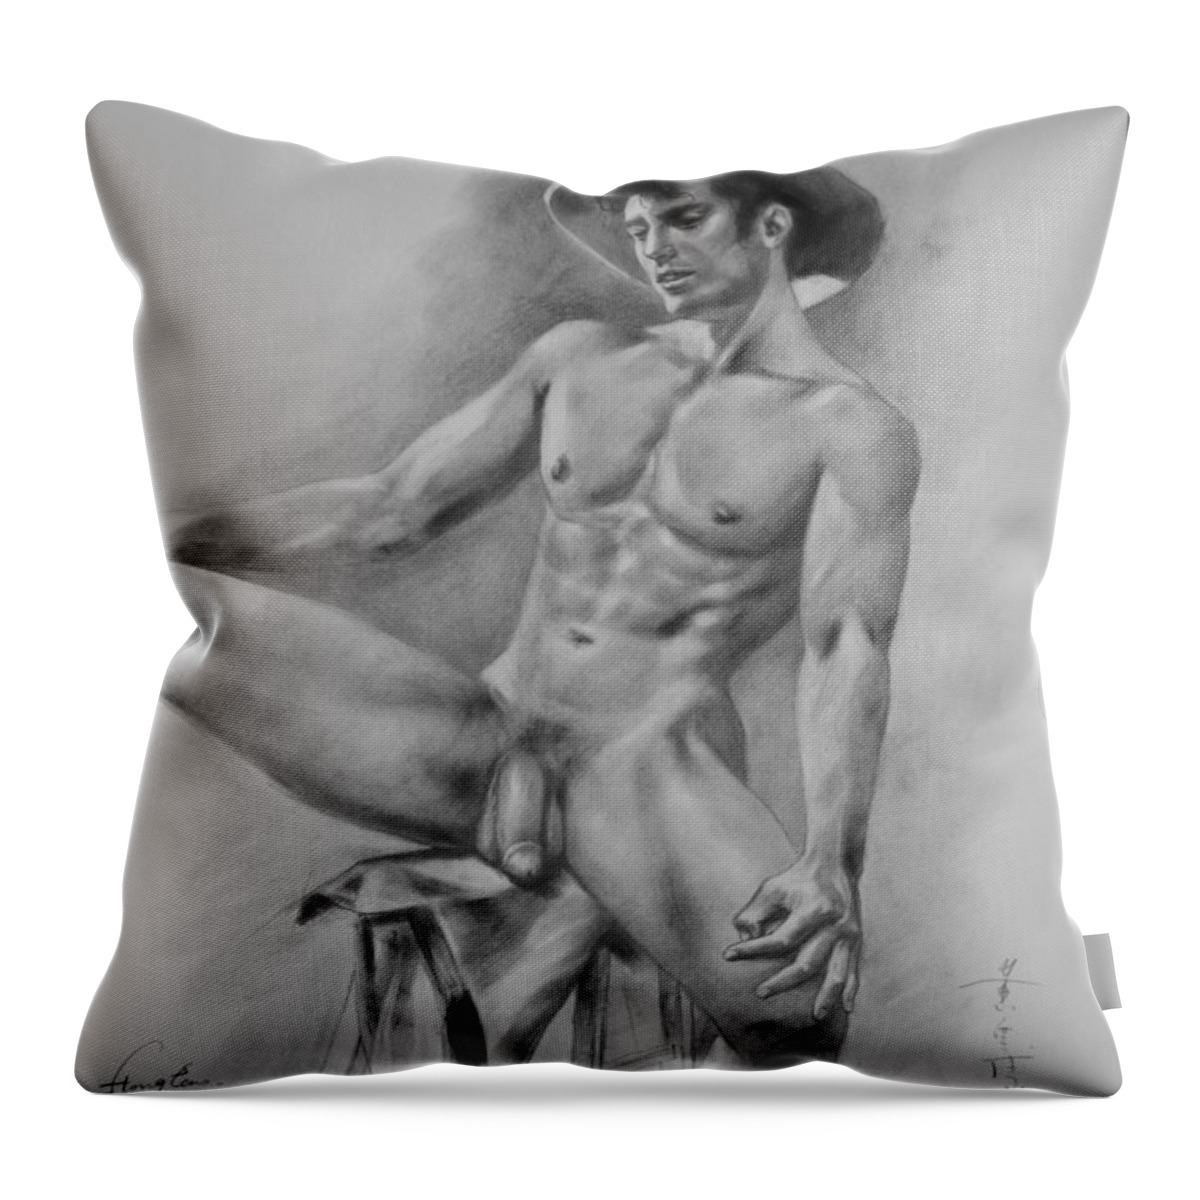 Original Art Throw Pillow featuring the drawing Original Drawing Charcoal Art Male Nude Men Gay Interest Cowboy On Paper #11-16-06 by Hongtao Huang